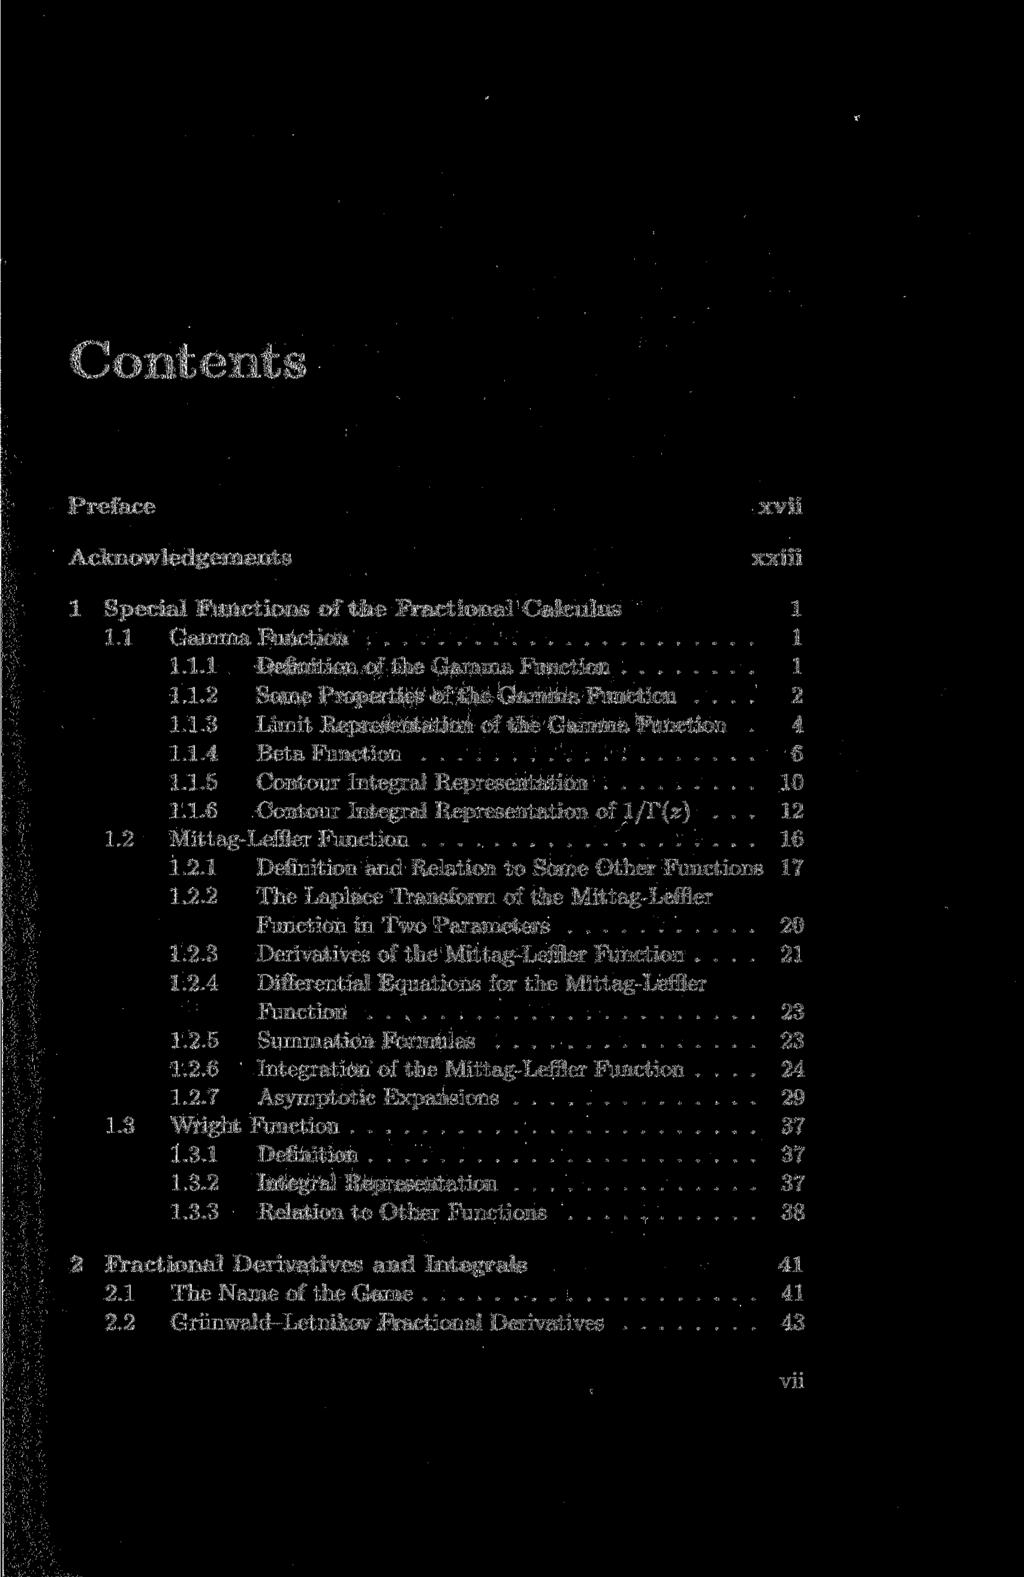 Contents Preface Acknowledgements xvii xxiii 1 Special Functions of the Fractional Calculus 1 1.1 Gamma Function 1 1.1.1 Definition of the Gamma Function 1 1.1.2 Some Properties of the Gamma Function.